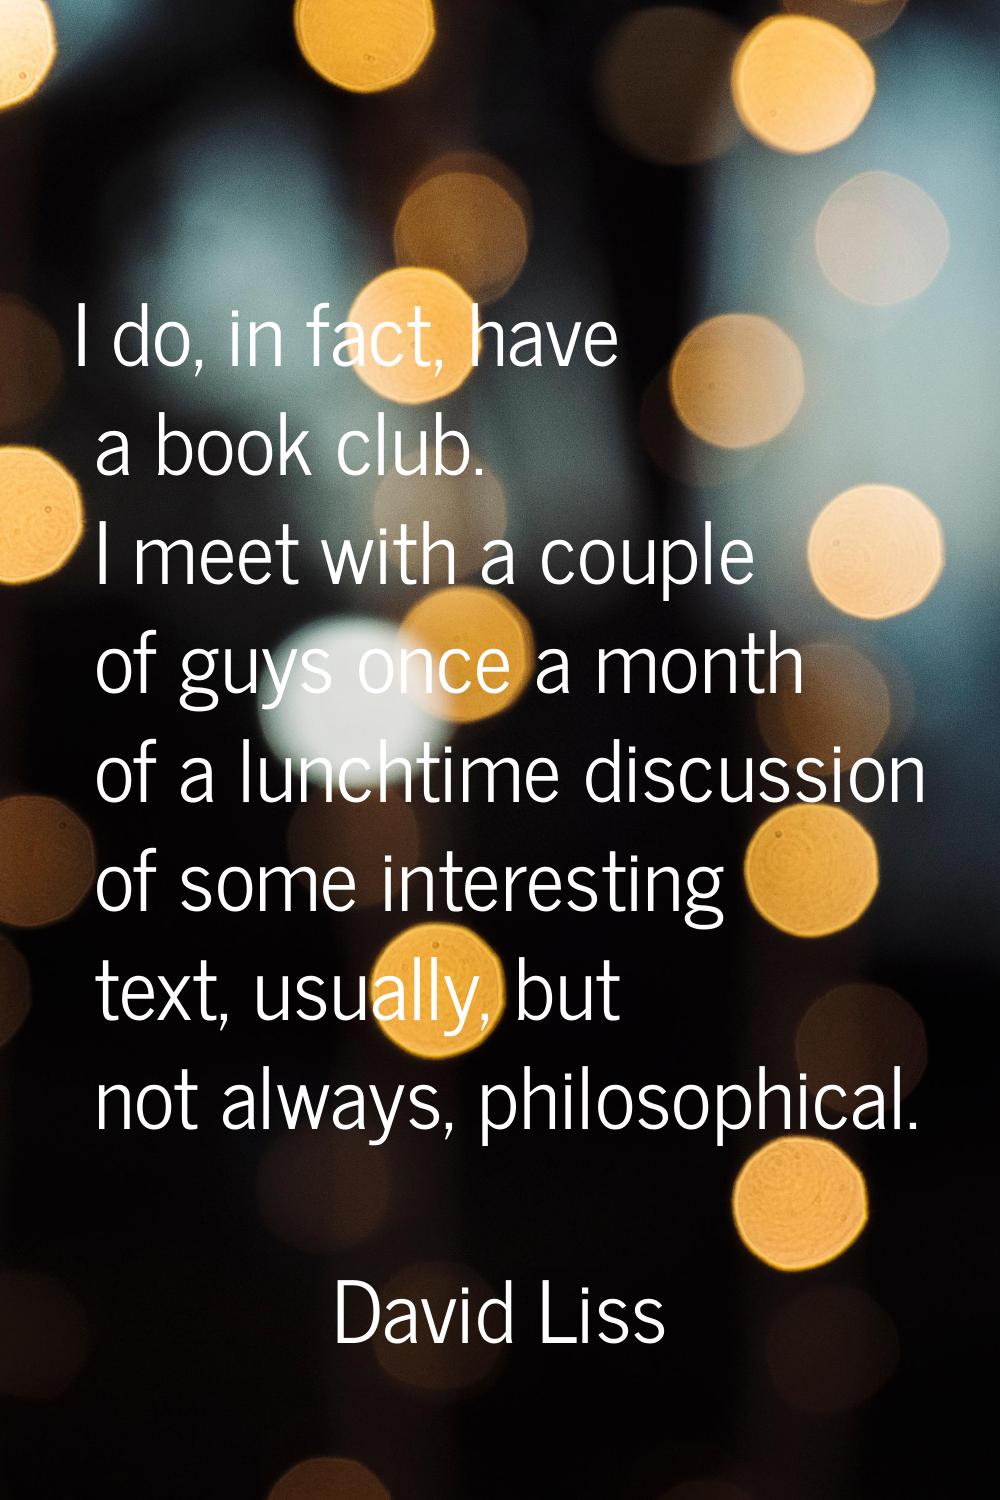 I do, in fact, have a book club. I meet with a couple of guys once a month of a lunchtime discussio